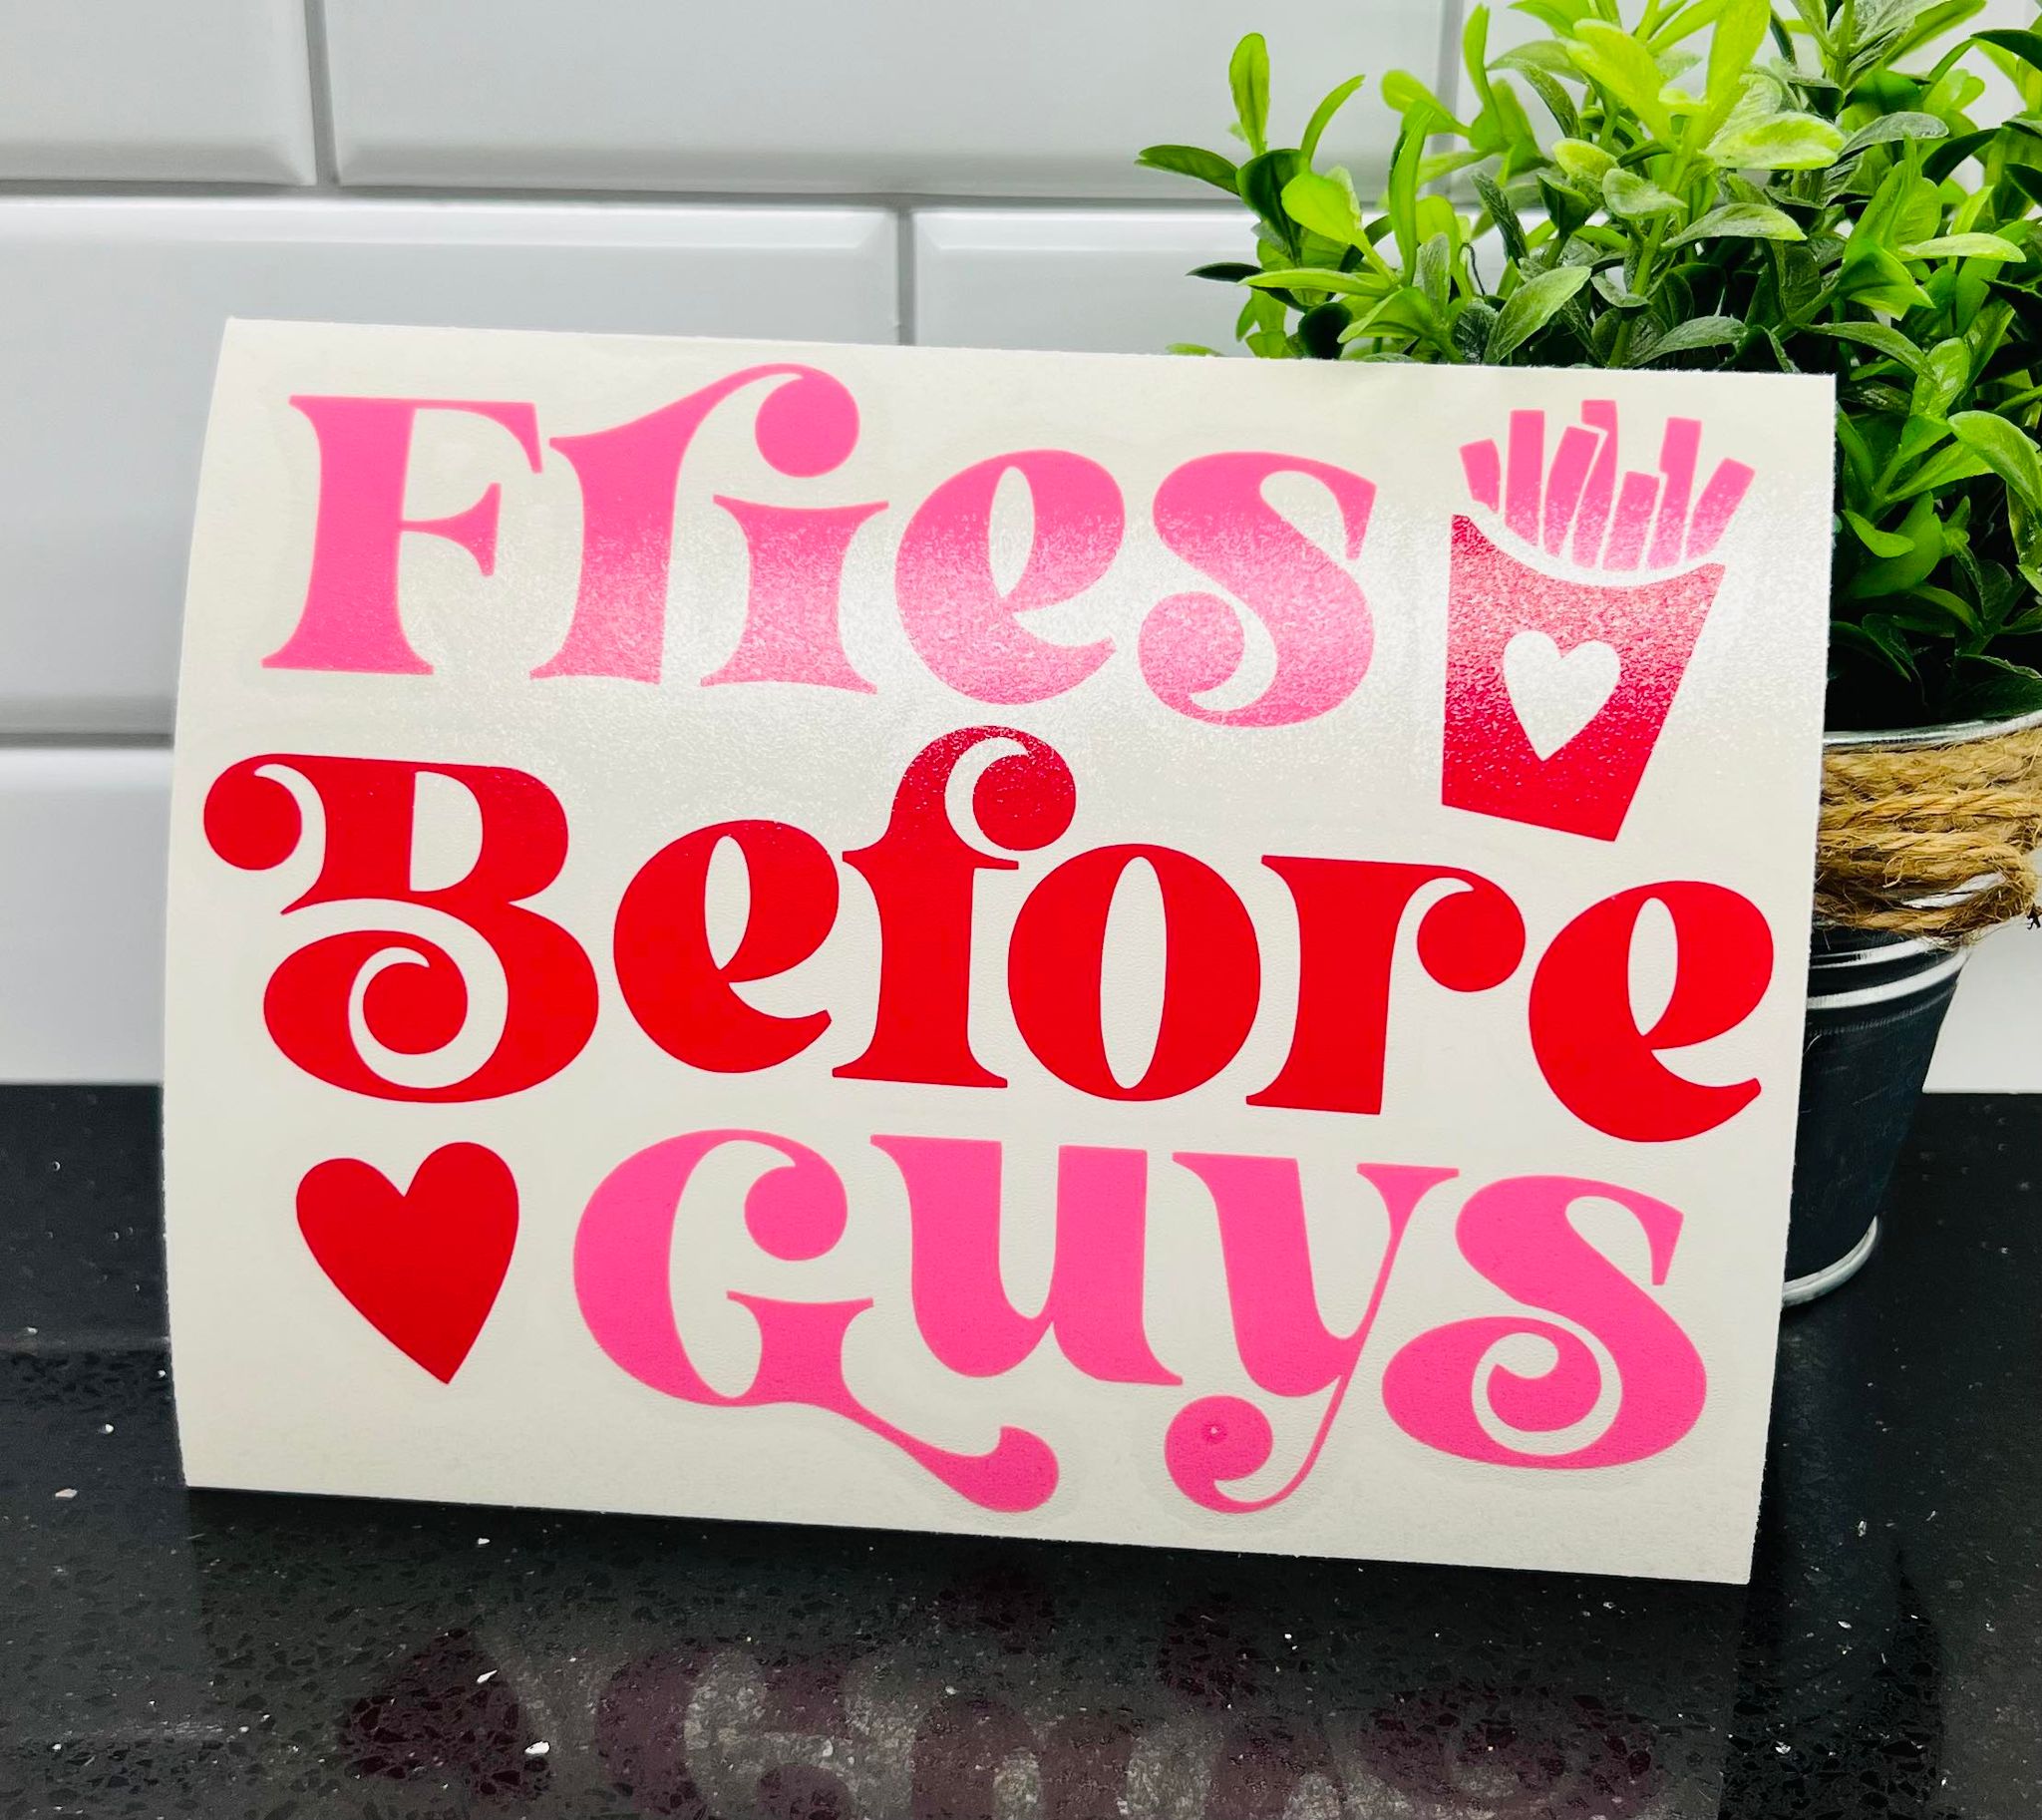 Fries before Guys Decal in Pink & Red